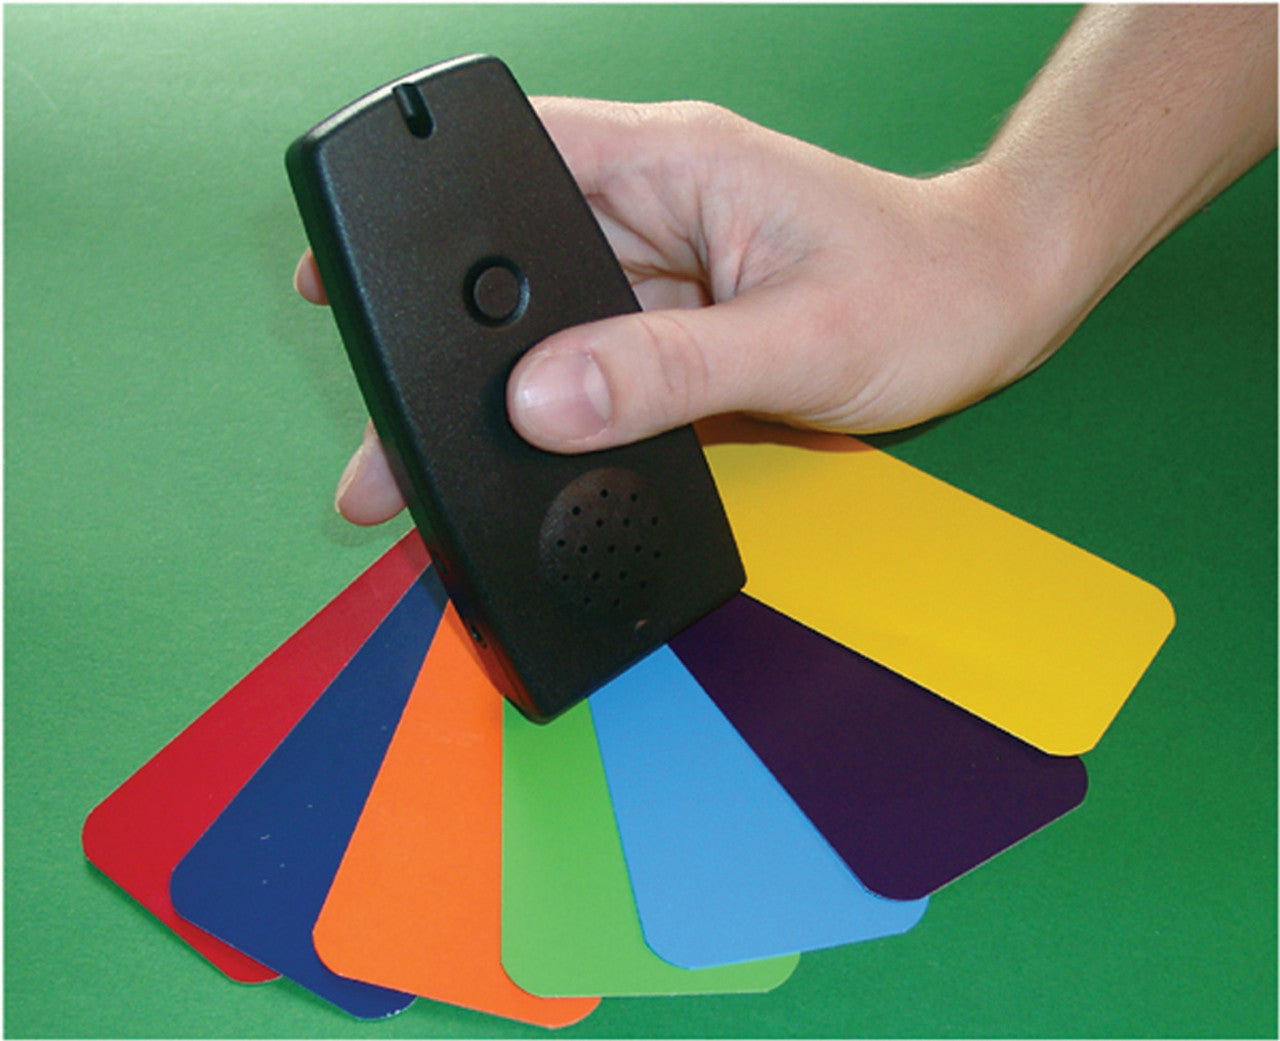 Colorino Talking Color Identifier for those who are blind or visually impaired. 